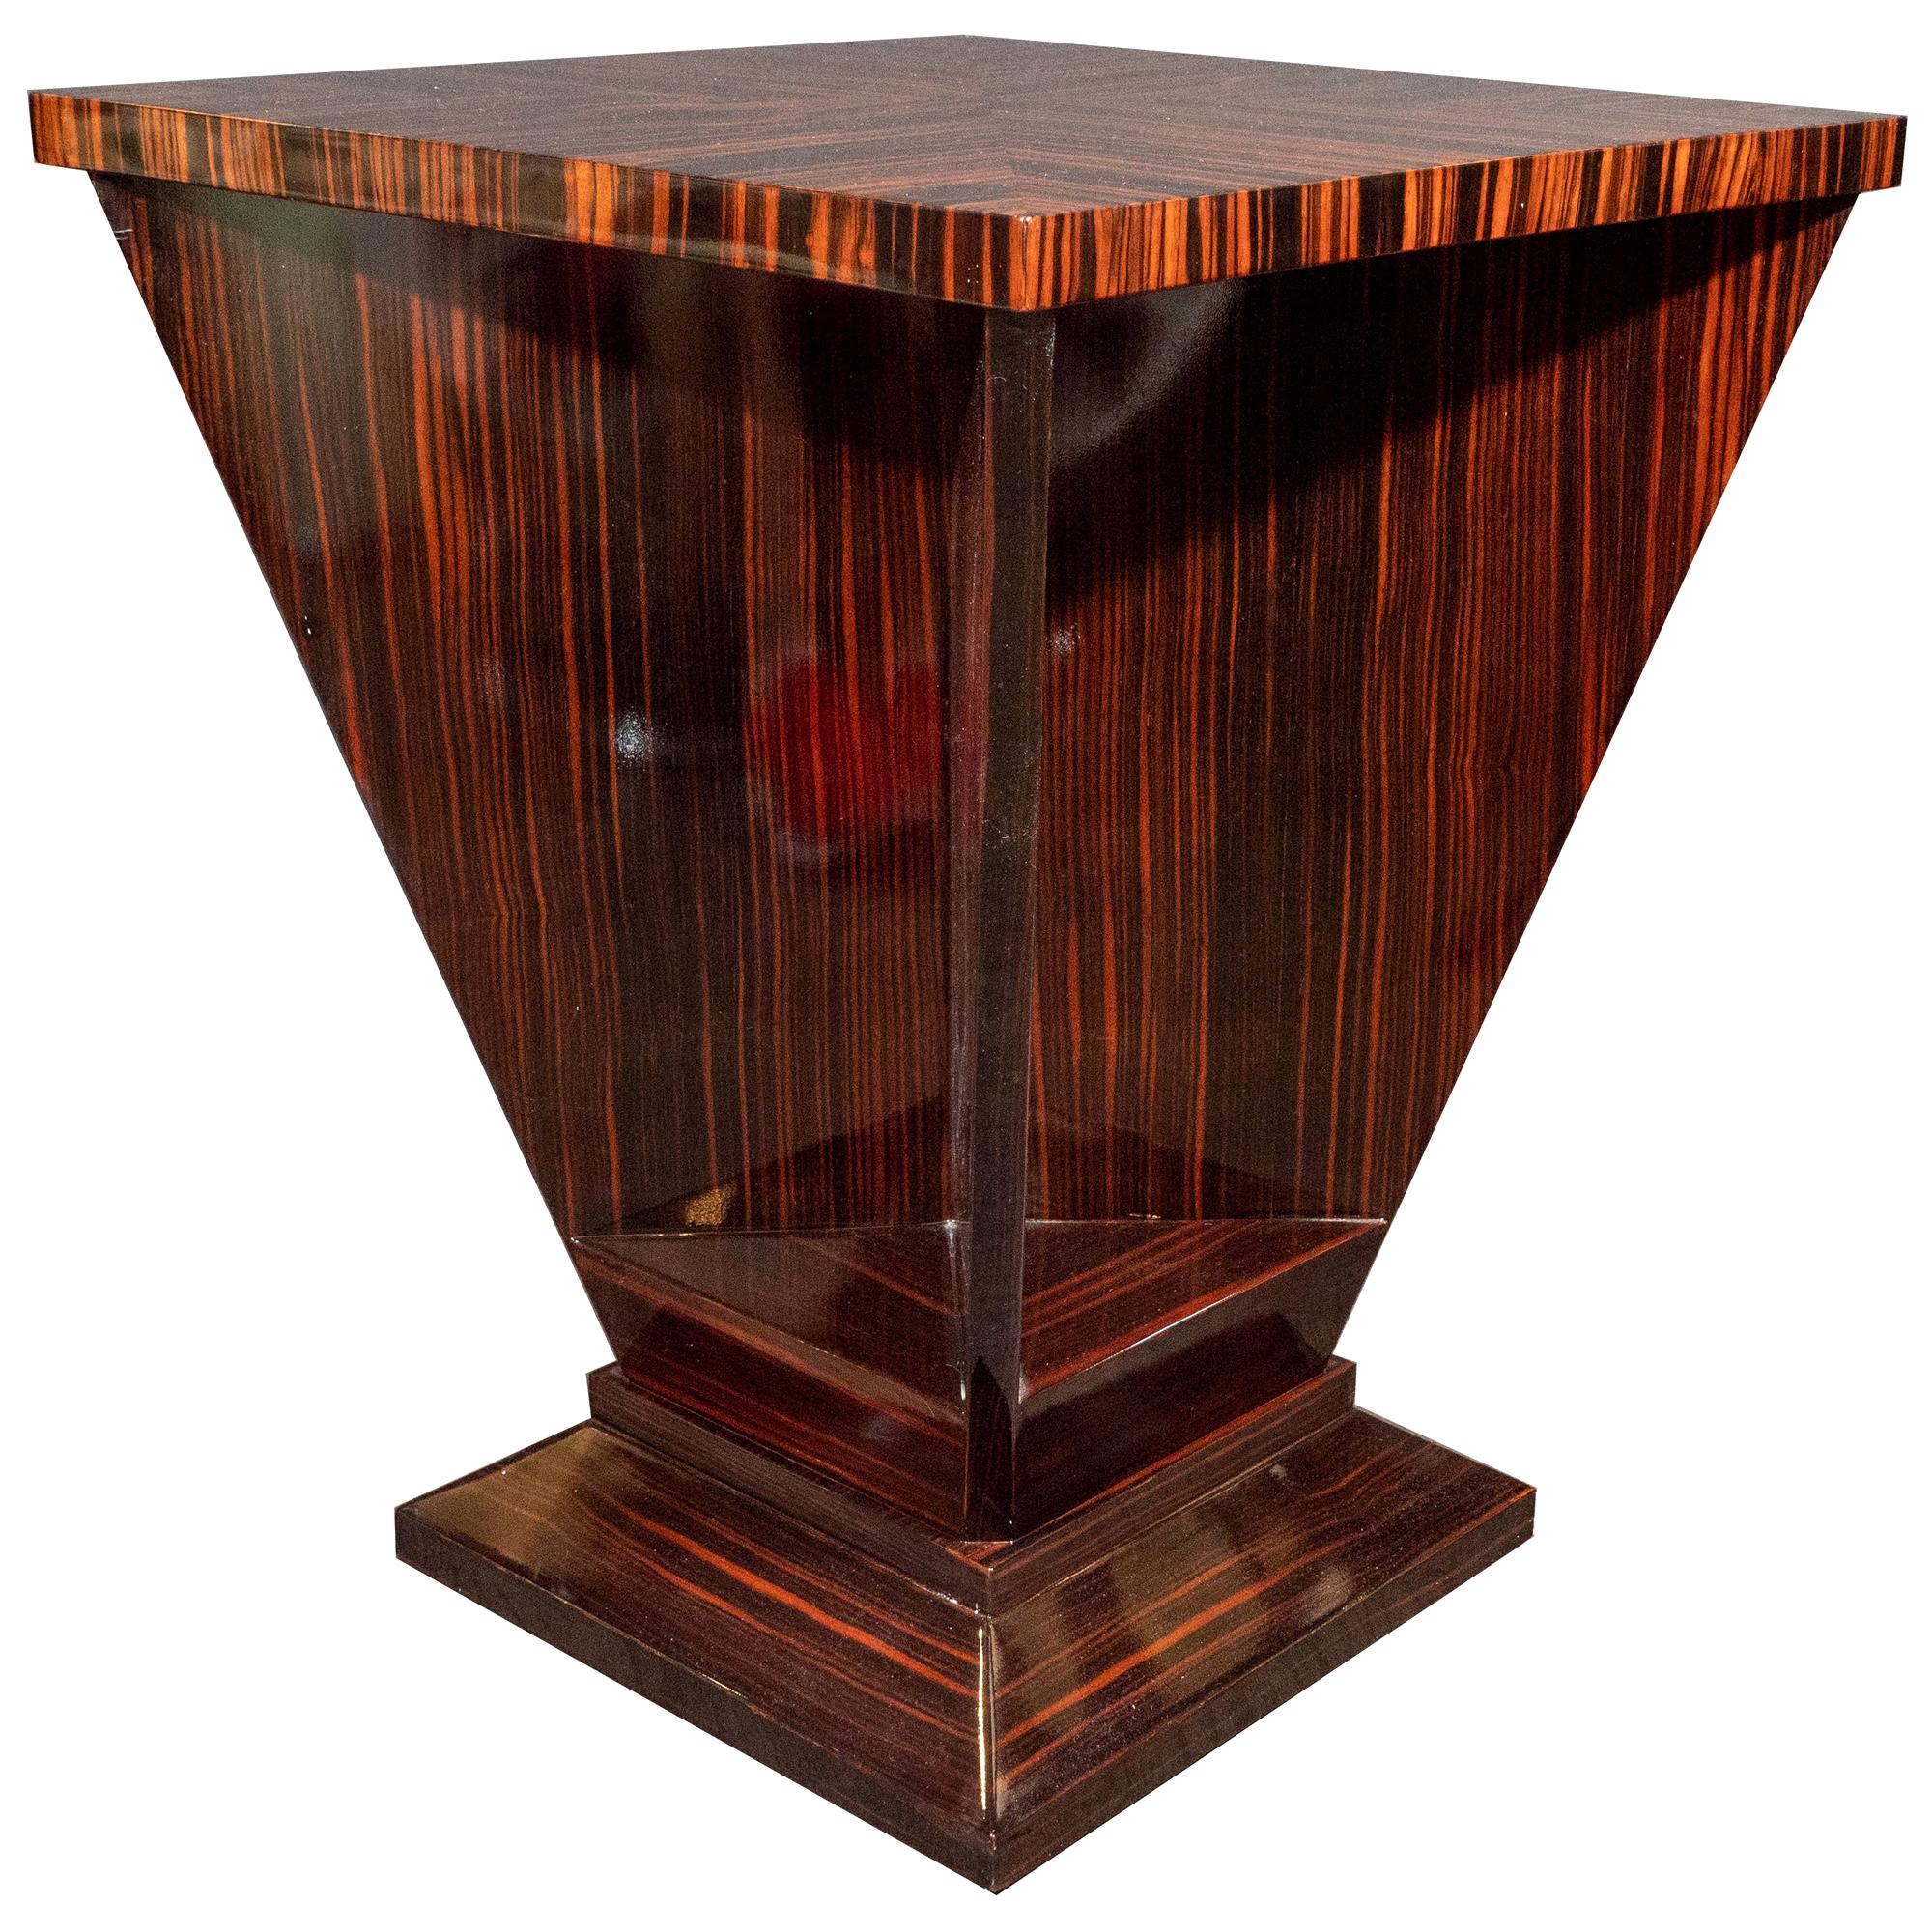 French Art Deco Cubist Occasional Table in Bookmatched Macassar